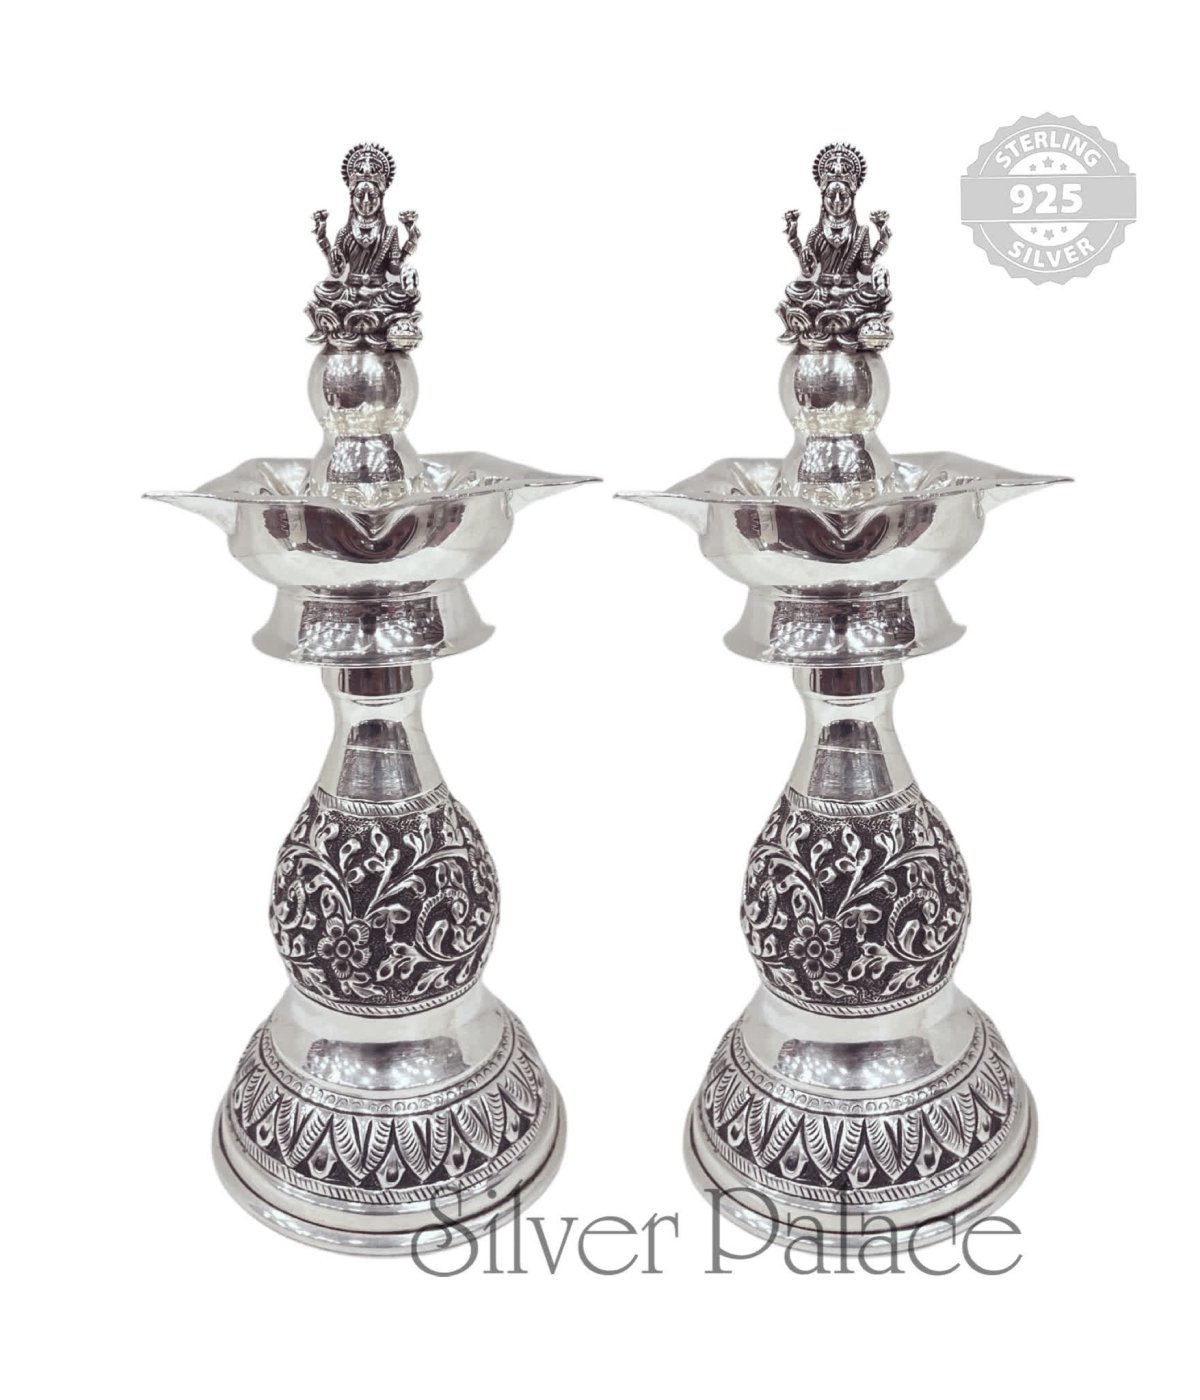 ANTIQUE SILVER FINISH LAMP WITH LAKSHMI TOP 92.5 SILVER 